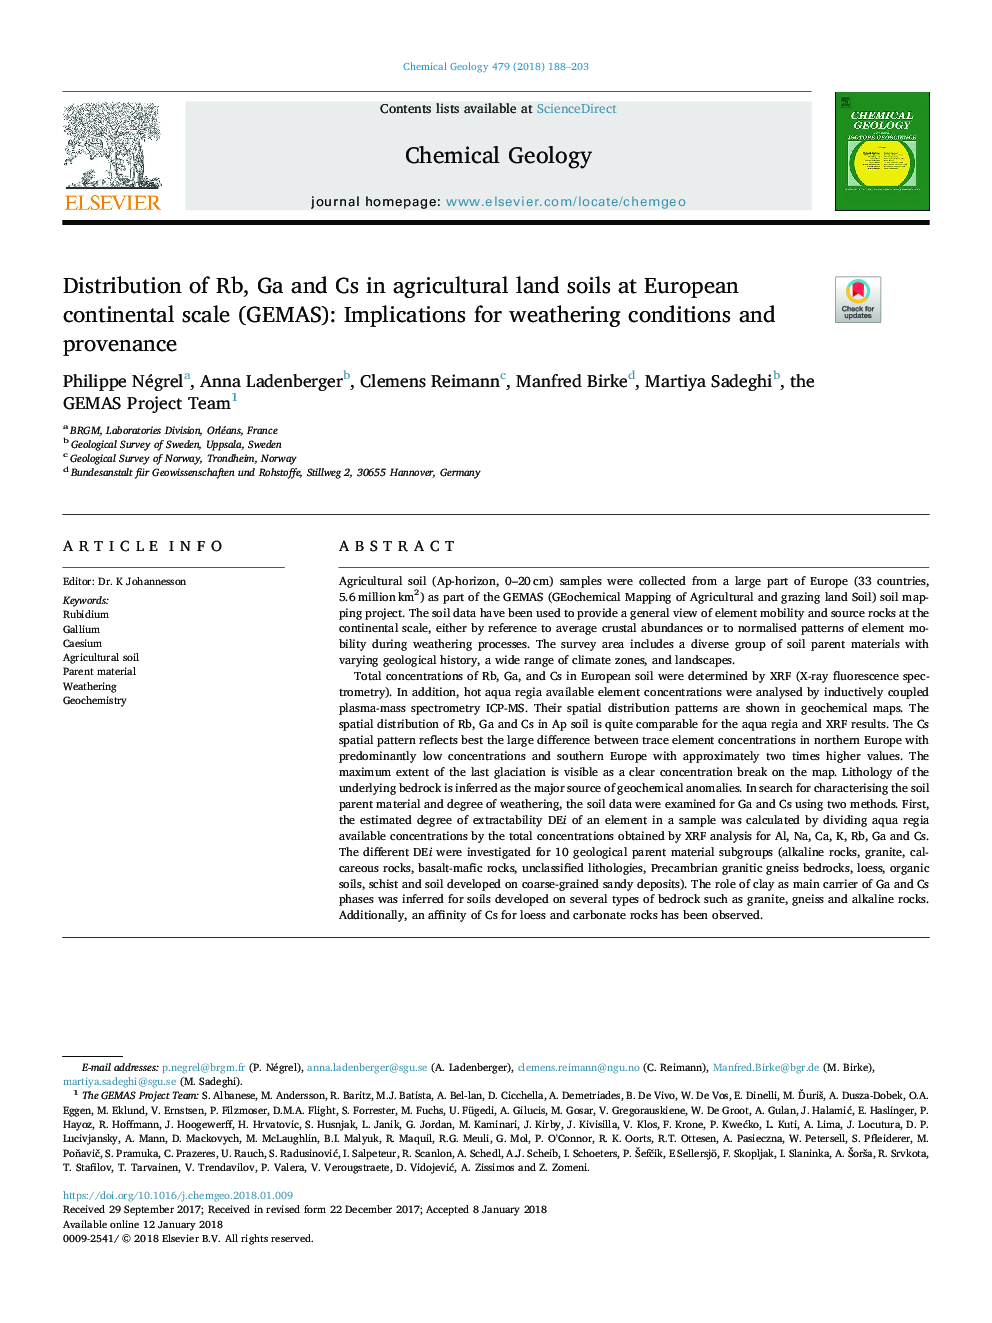 Distribution of Rb, Ga and Cs in agricultural land soils at European continental scale (GEMAS): Implications for weathering conditions and provenance